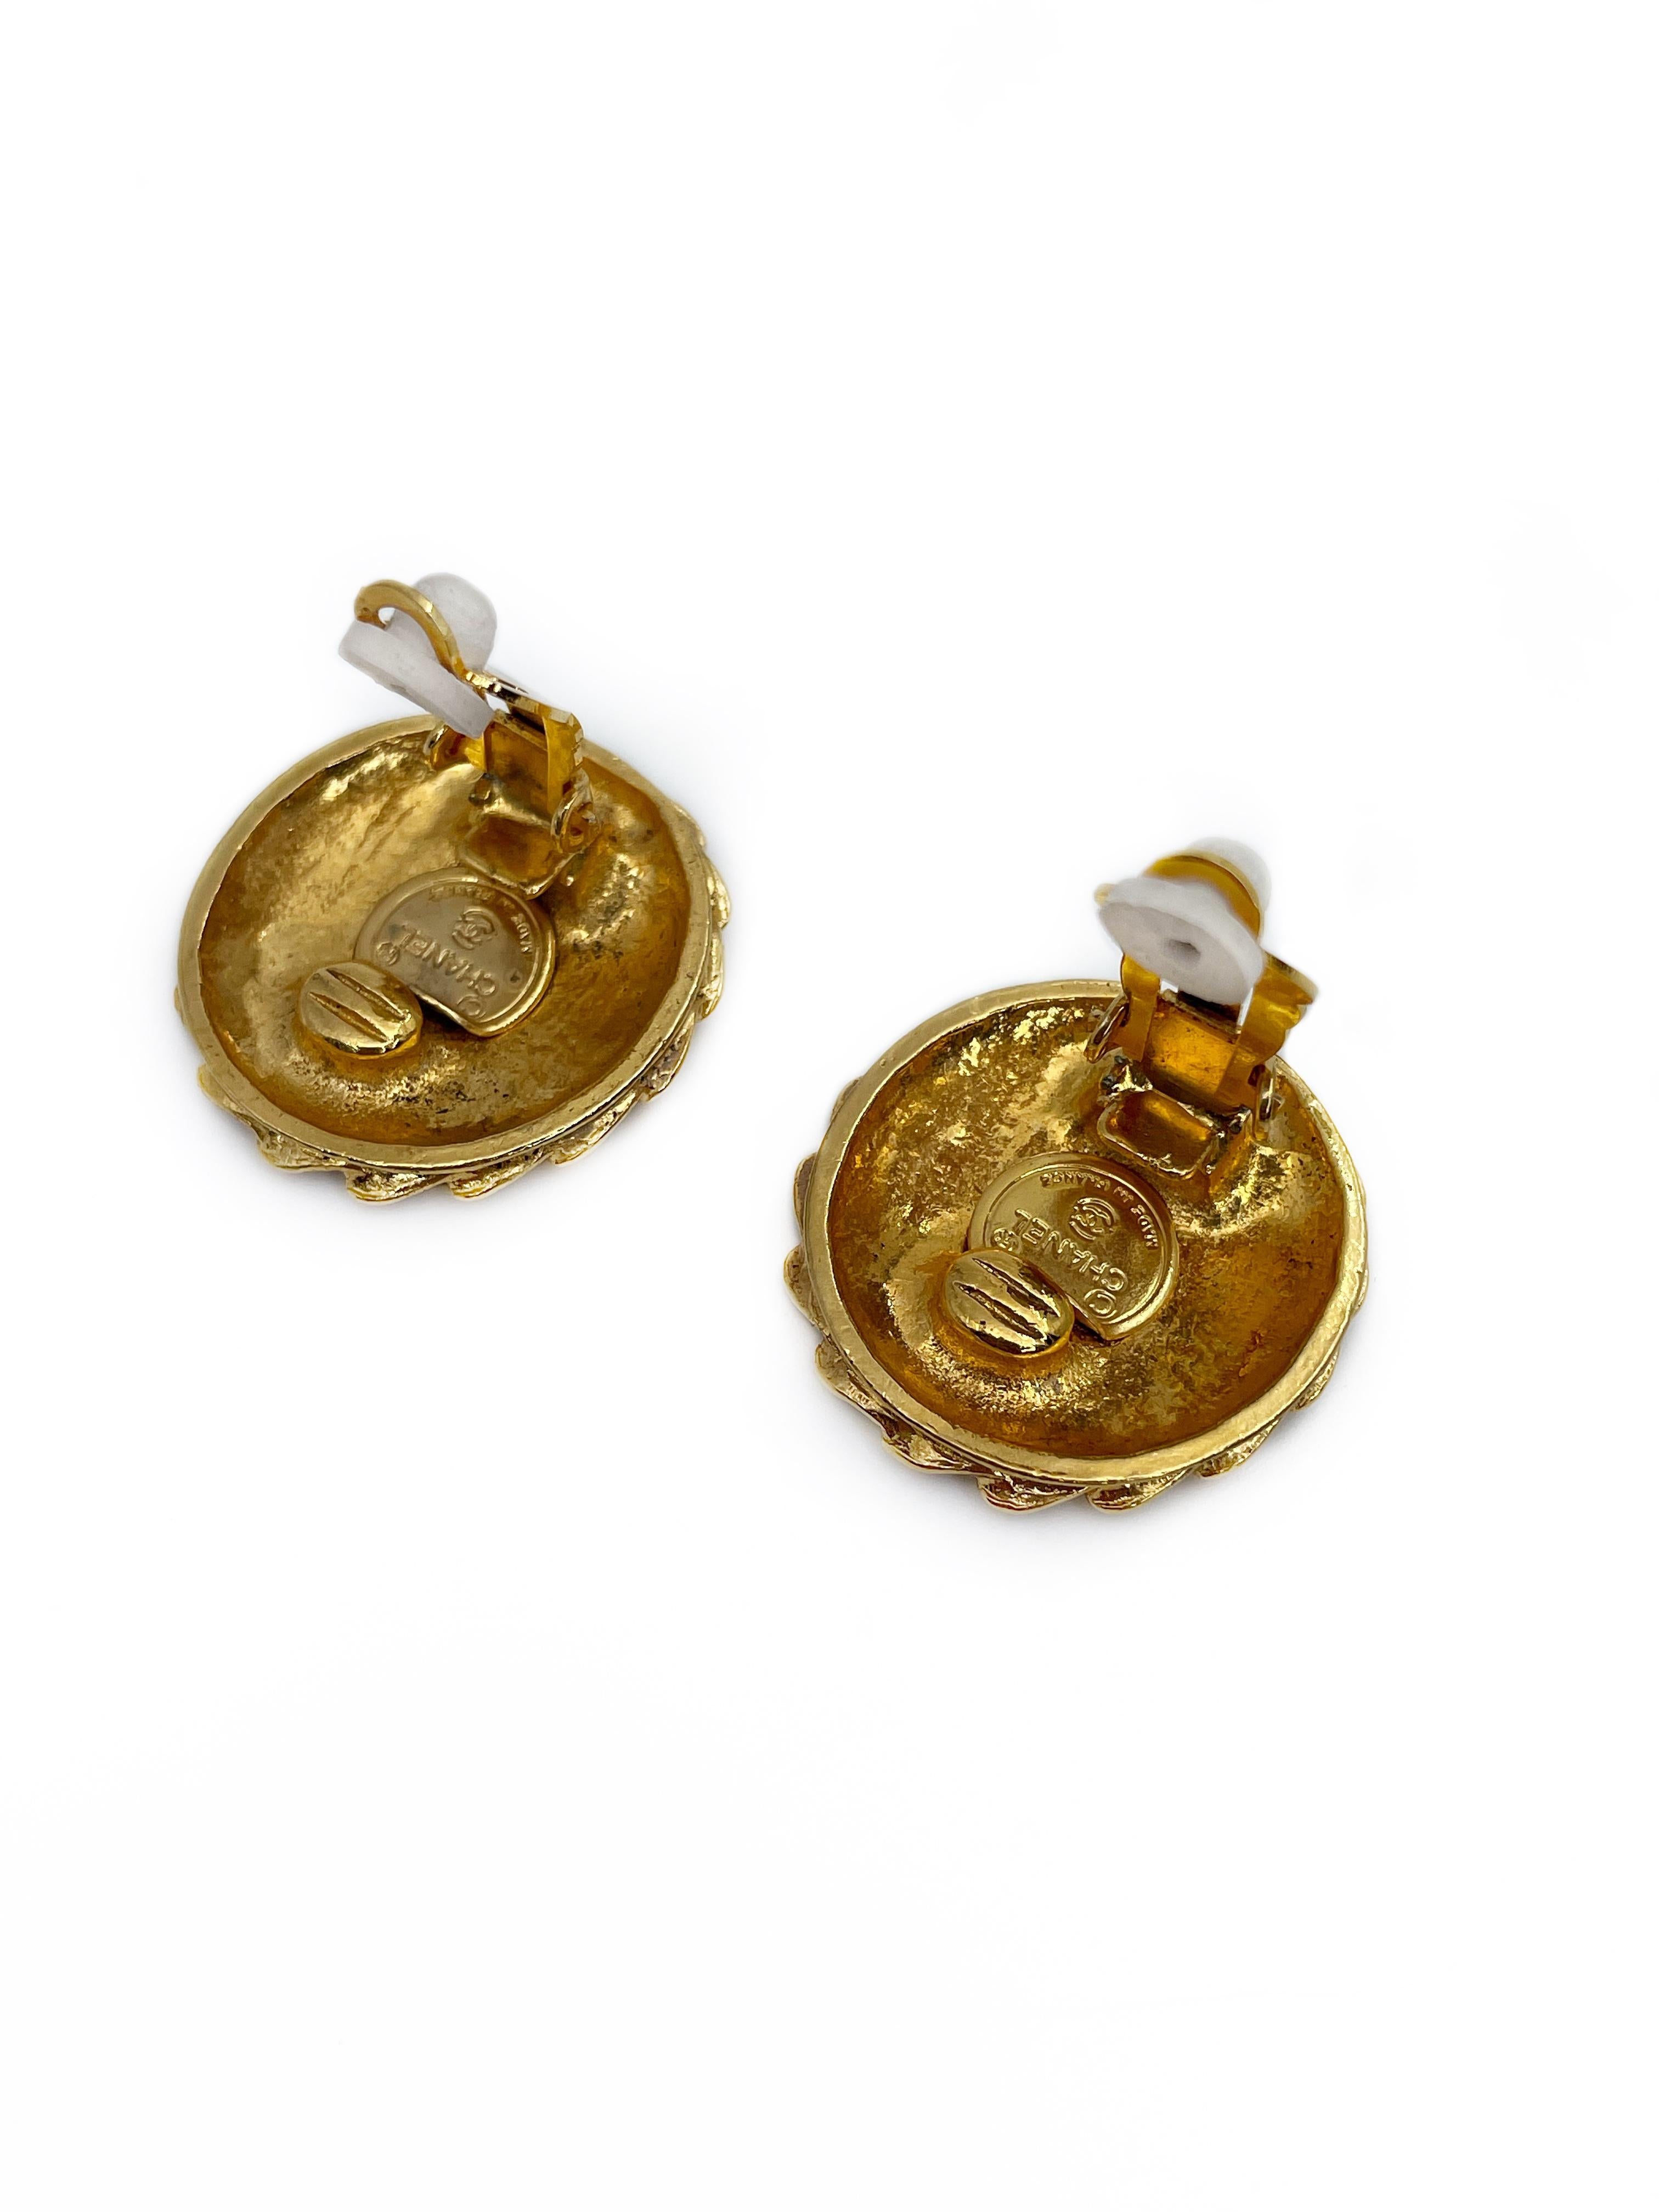 This is a round Madame Coco clip on earrings designed by Chanel. The piece is gold plated, adorned with clear rhinestones. It is made in 1980’s.

Markings: “©CHANEL® - Made in France” (shown in photos).

Diameter: 2.6cm